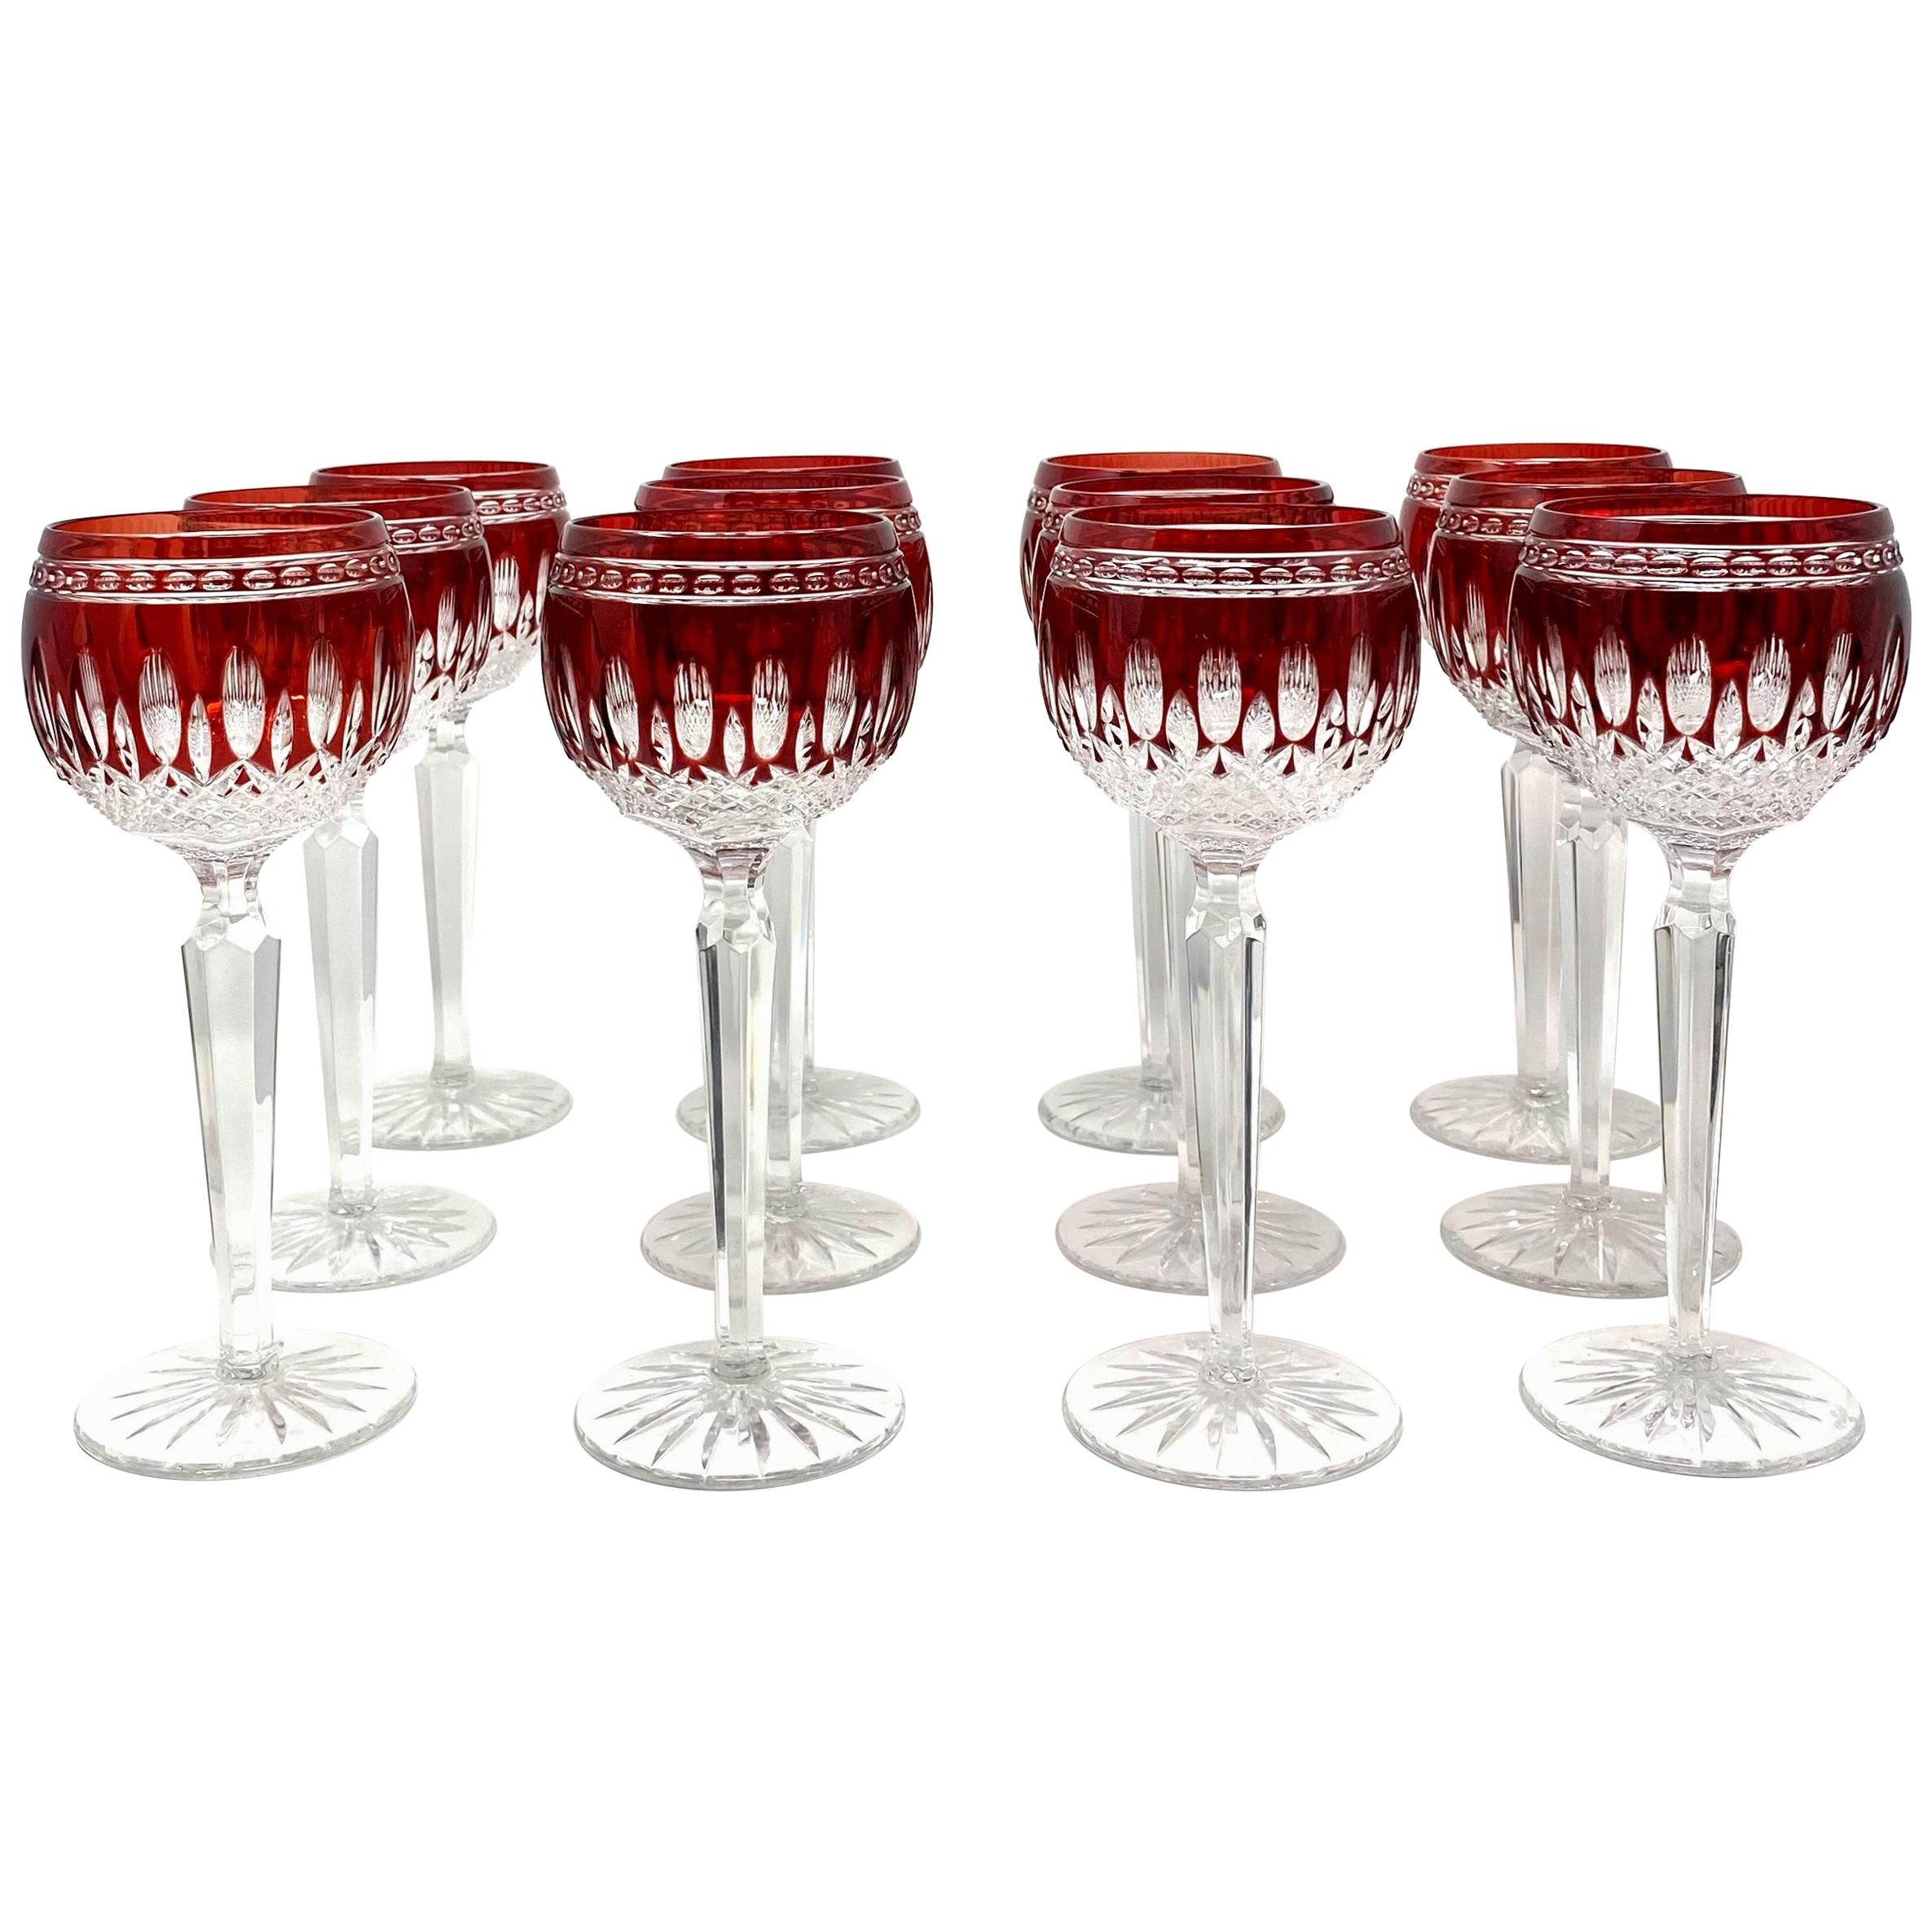 Set of 12 Signed Waterford Crystal Clarendon Ruby Wine Glasses